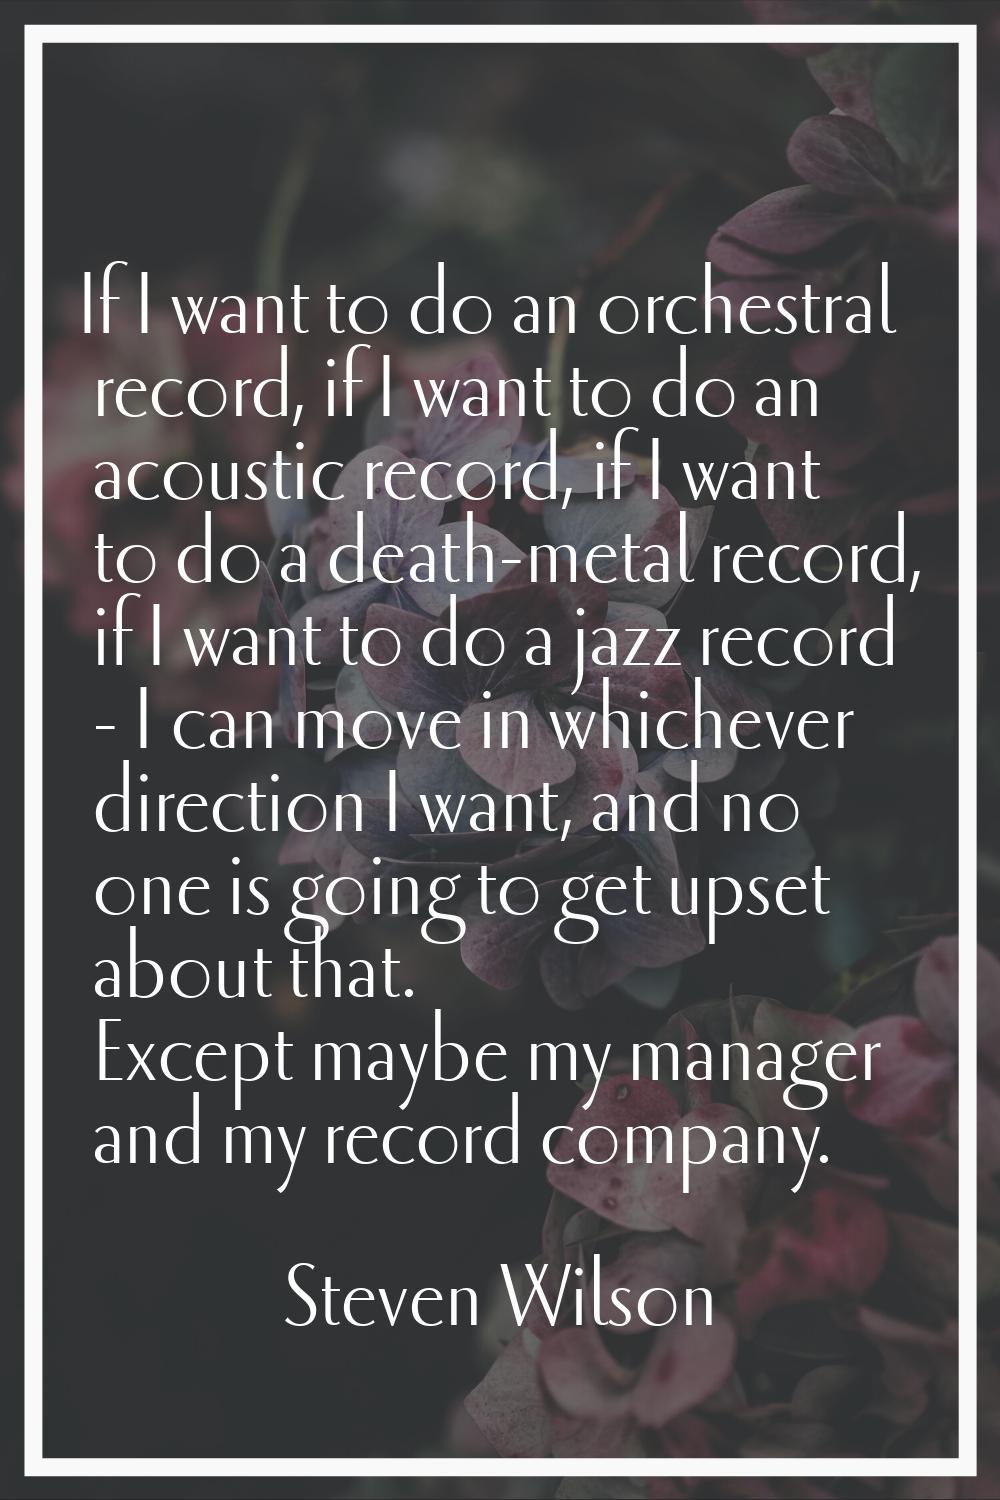 If I want to do an orchestral record, if I want to do an acoustic record, if I want to do a death-m